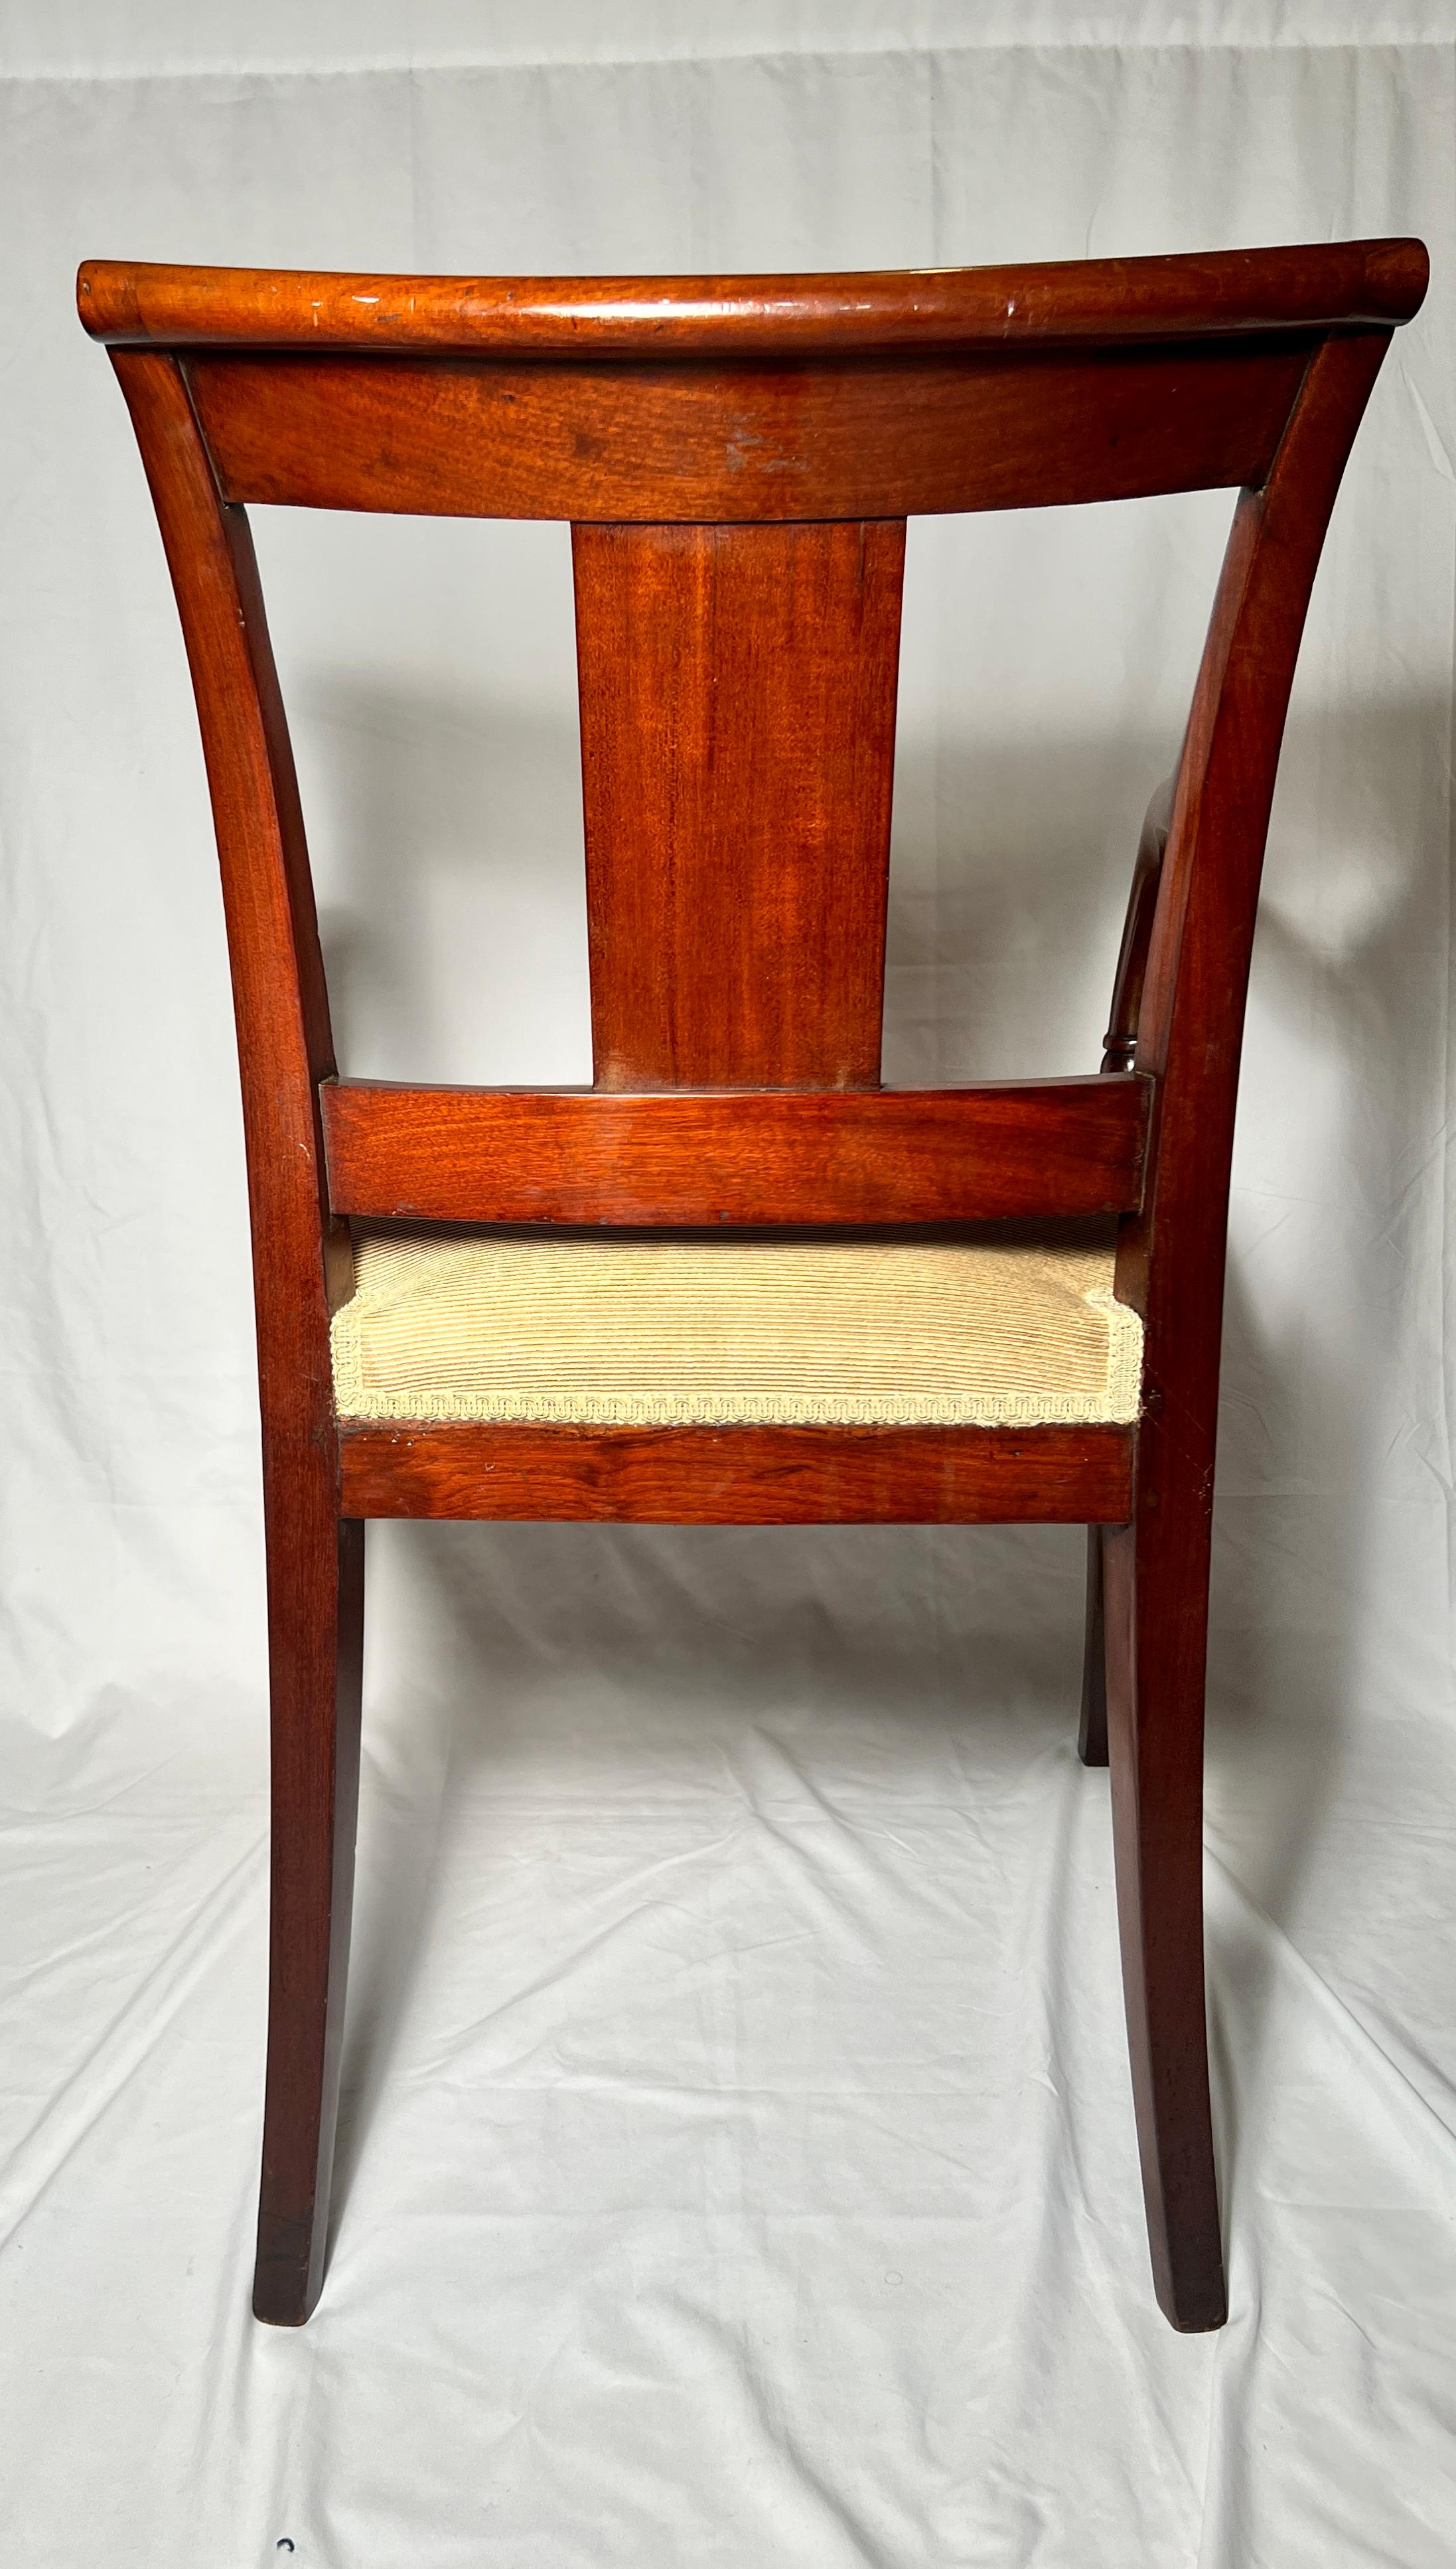 Antique Mahogany “Louis Philippe” Desk Chair Voltaire c 1830-50 In Good Condition For Sale In New Orleans, LA